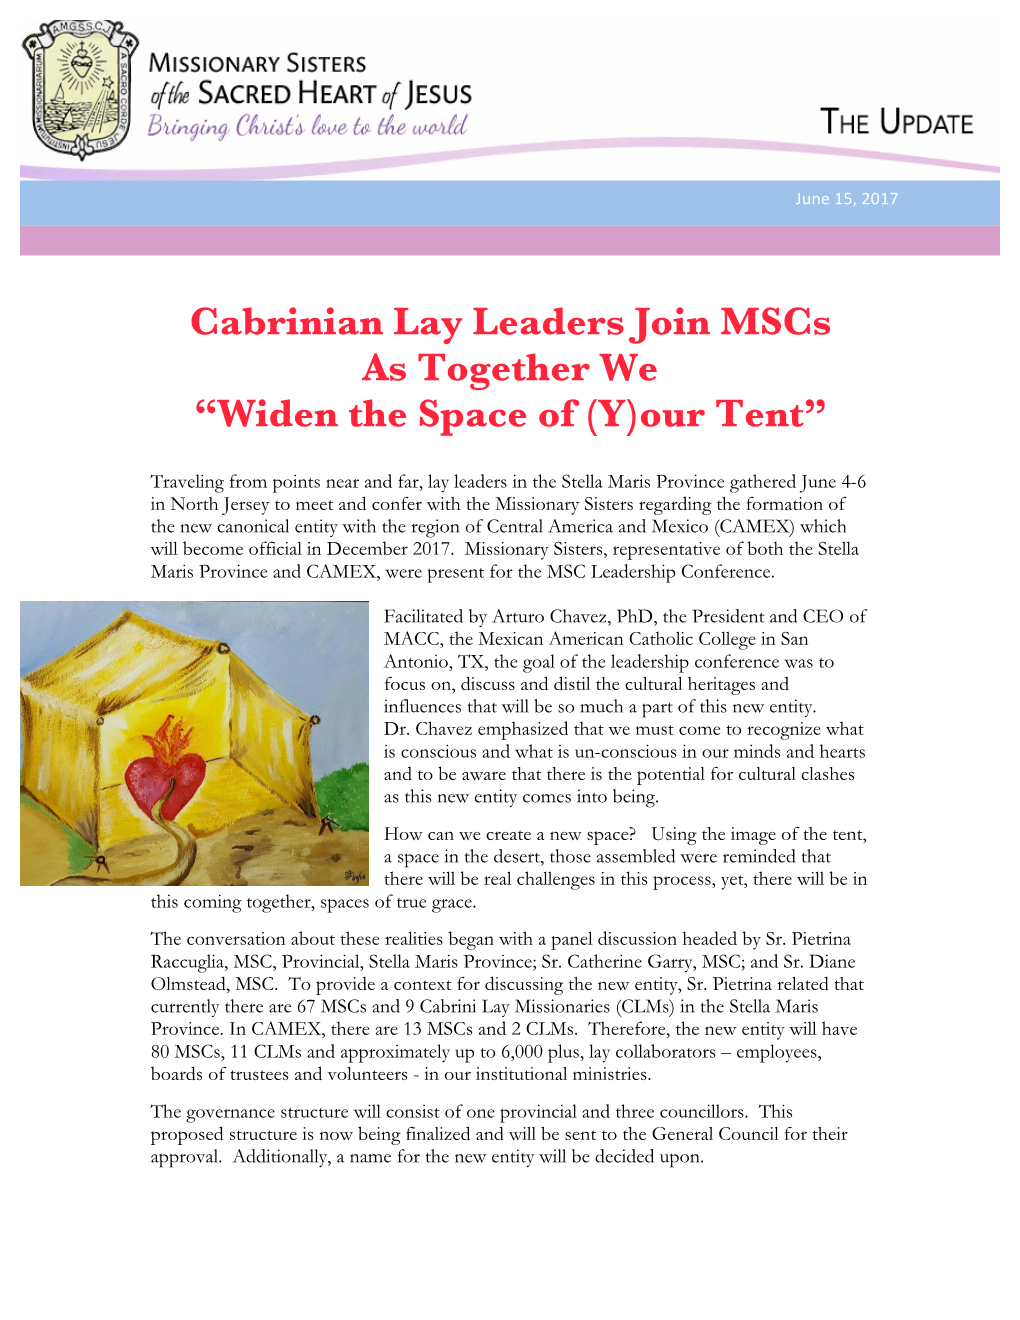 Cabrinian Lay Leaders Join Mscs As Together We “Widen the Space of (Y)Our Tent”